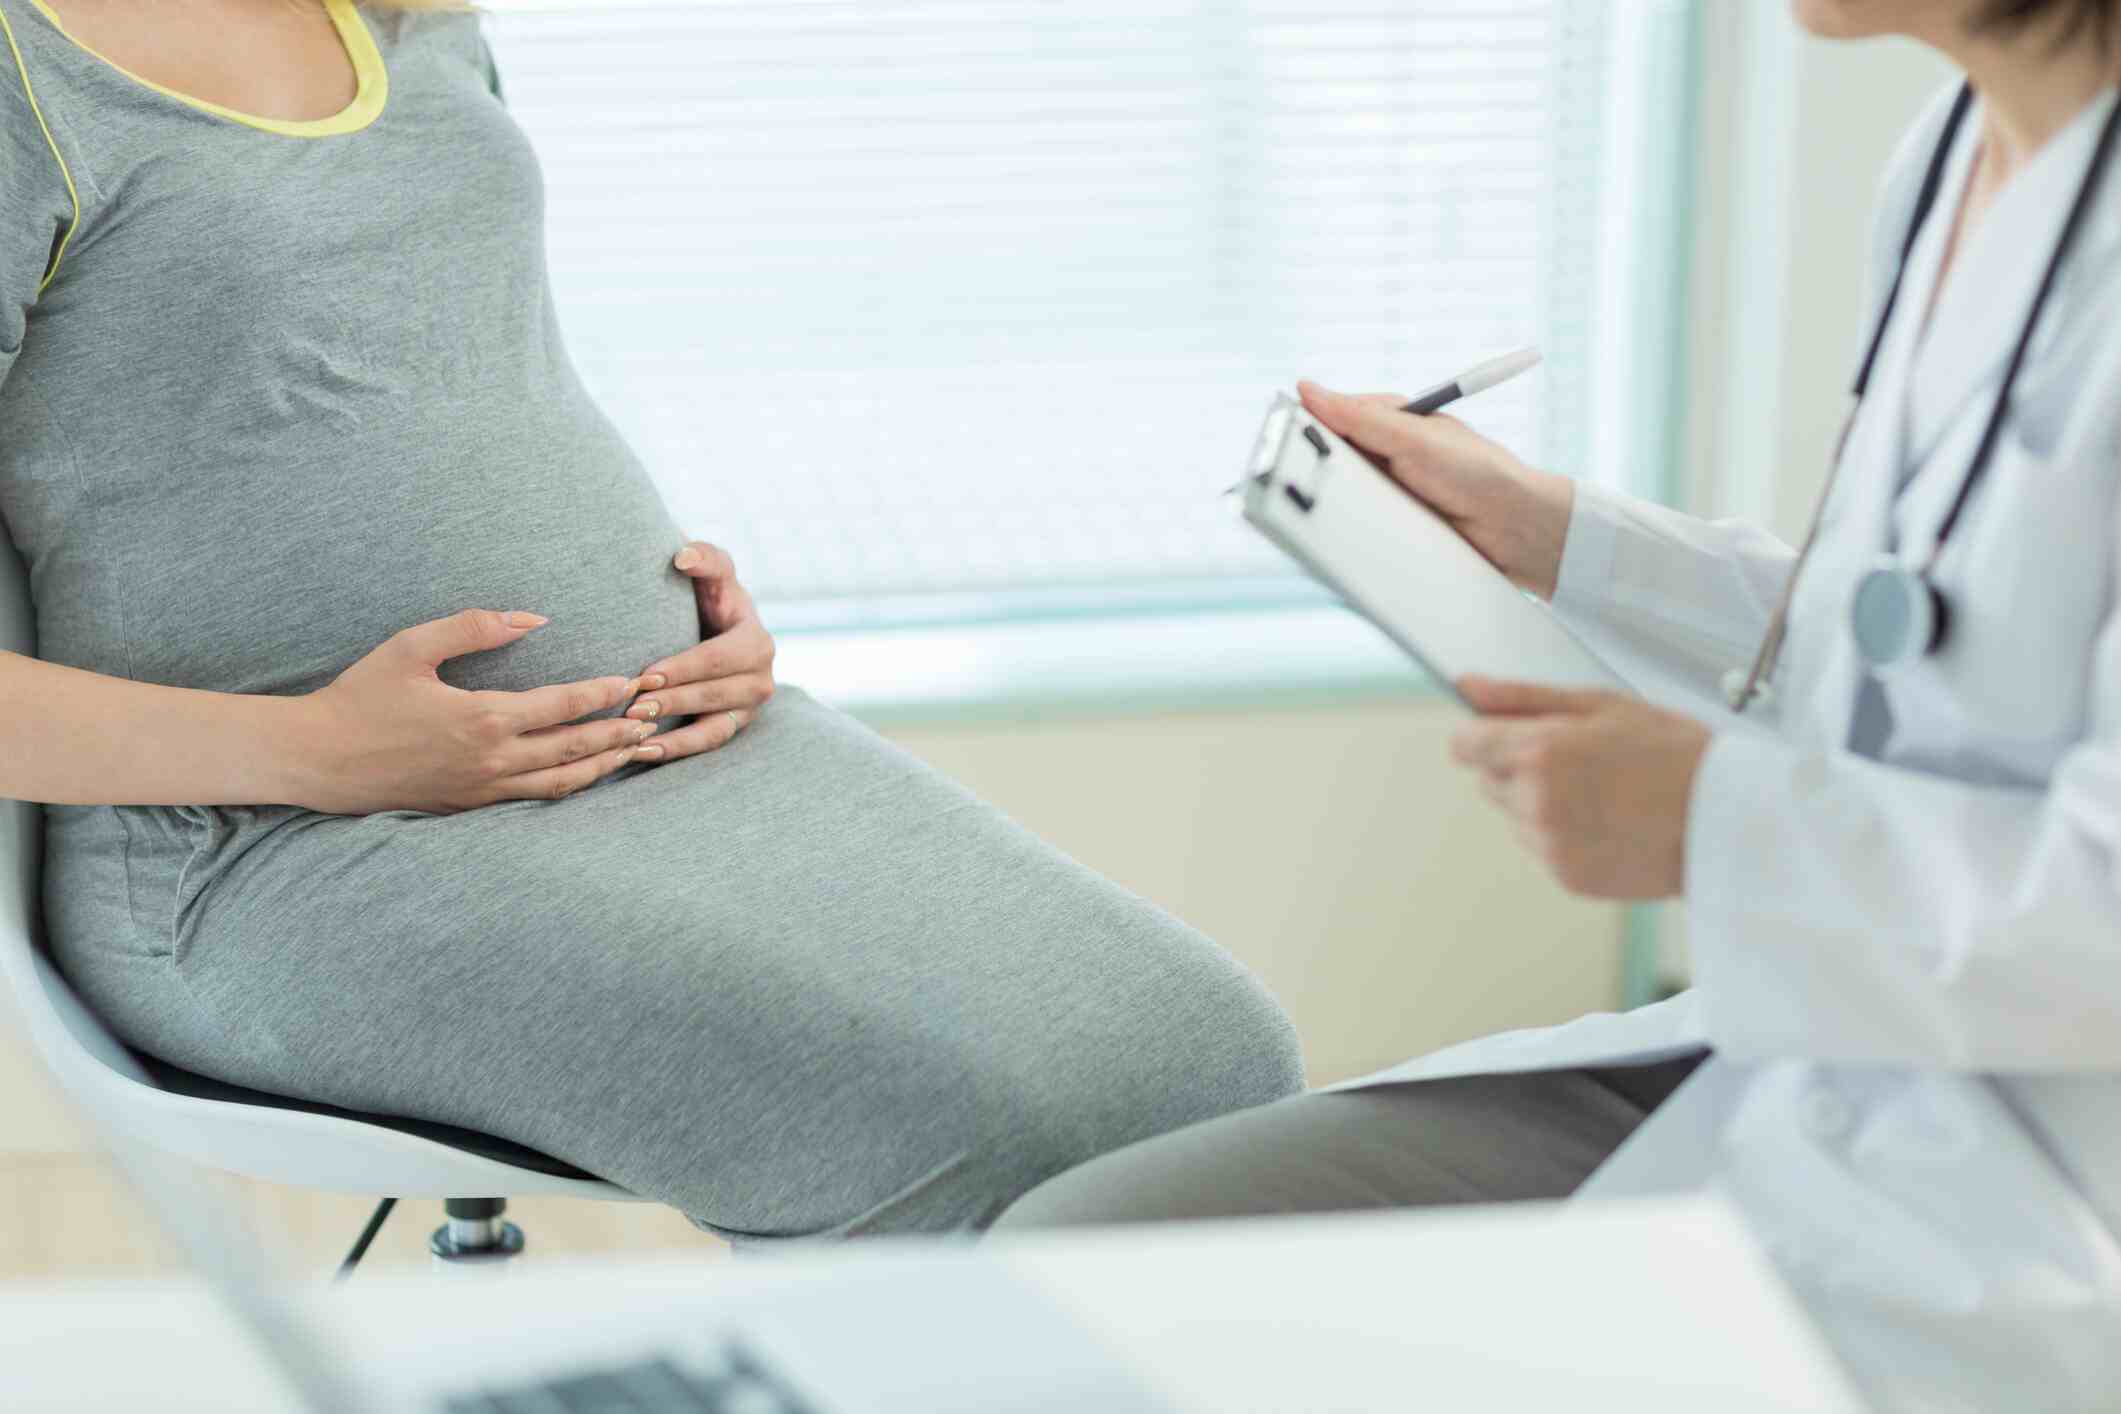 Mobile prenatal care via apps can complement in-person visits: study